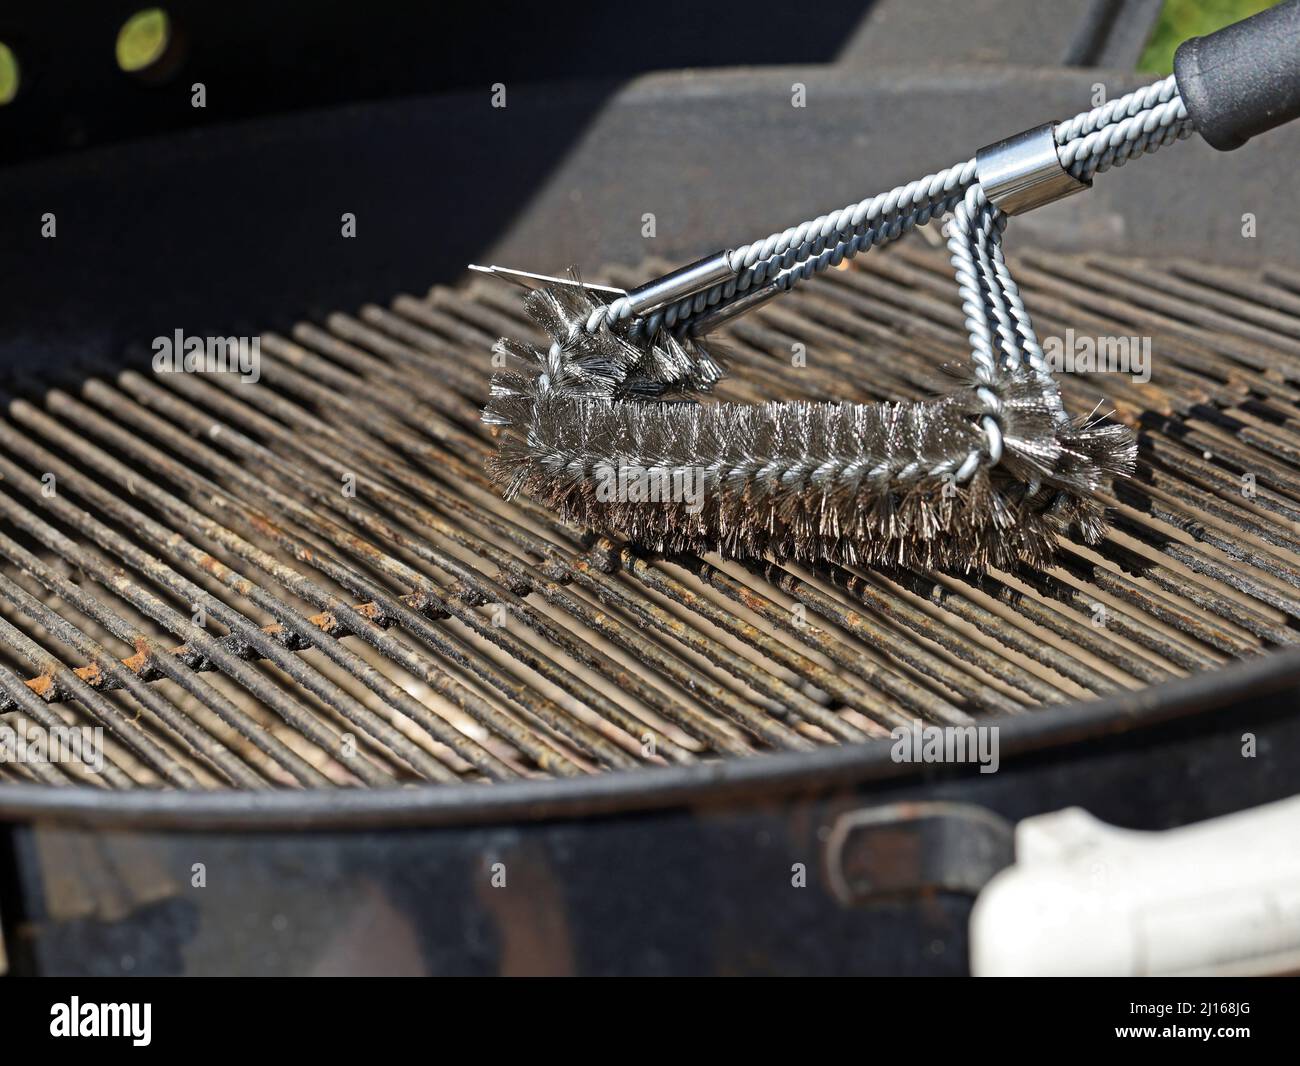 https://c8.alamy.com/comp/2J168JG/cleaning-a-grill-dirty-grill-grate-is-cleaned-with-stainless-steel-grill-brush-2J168JG.jpg